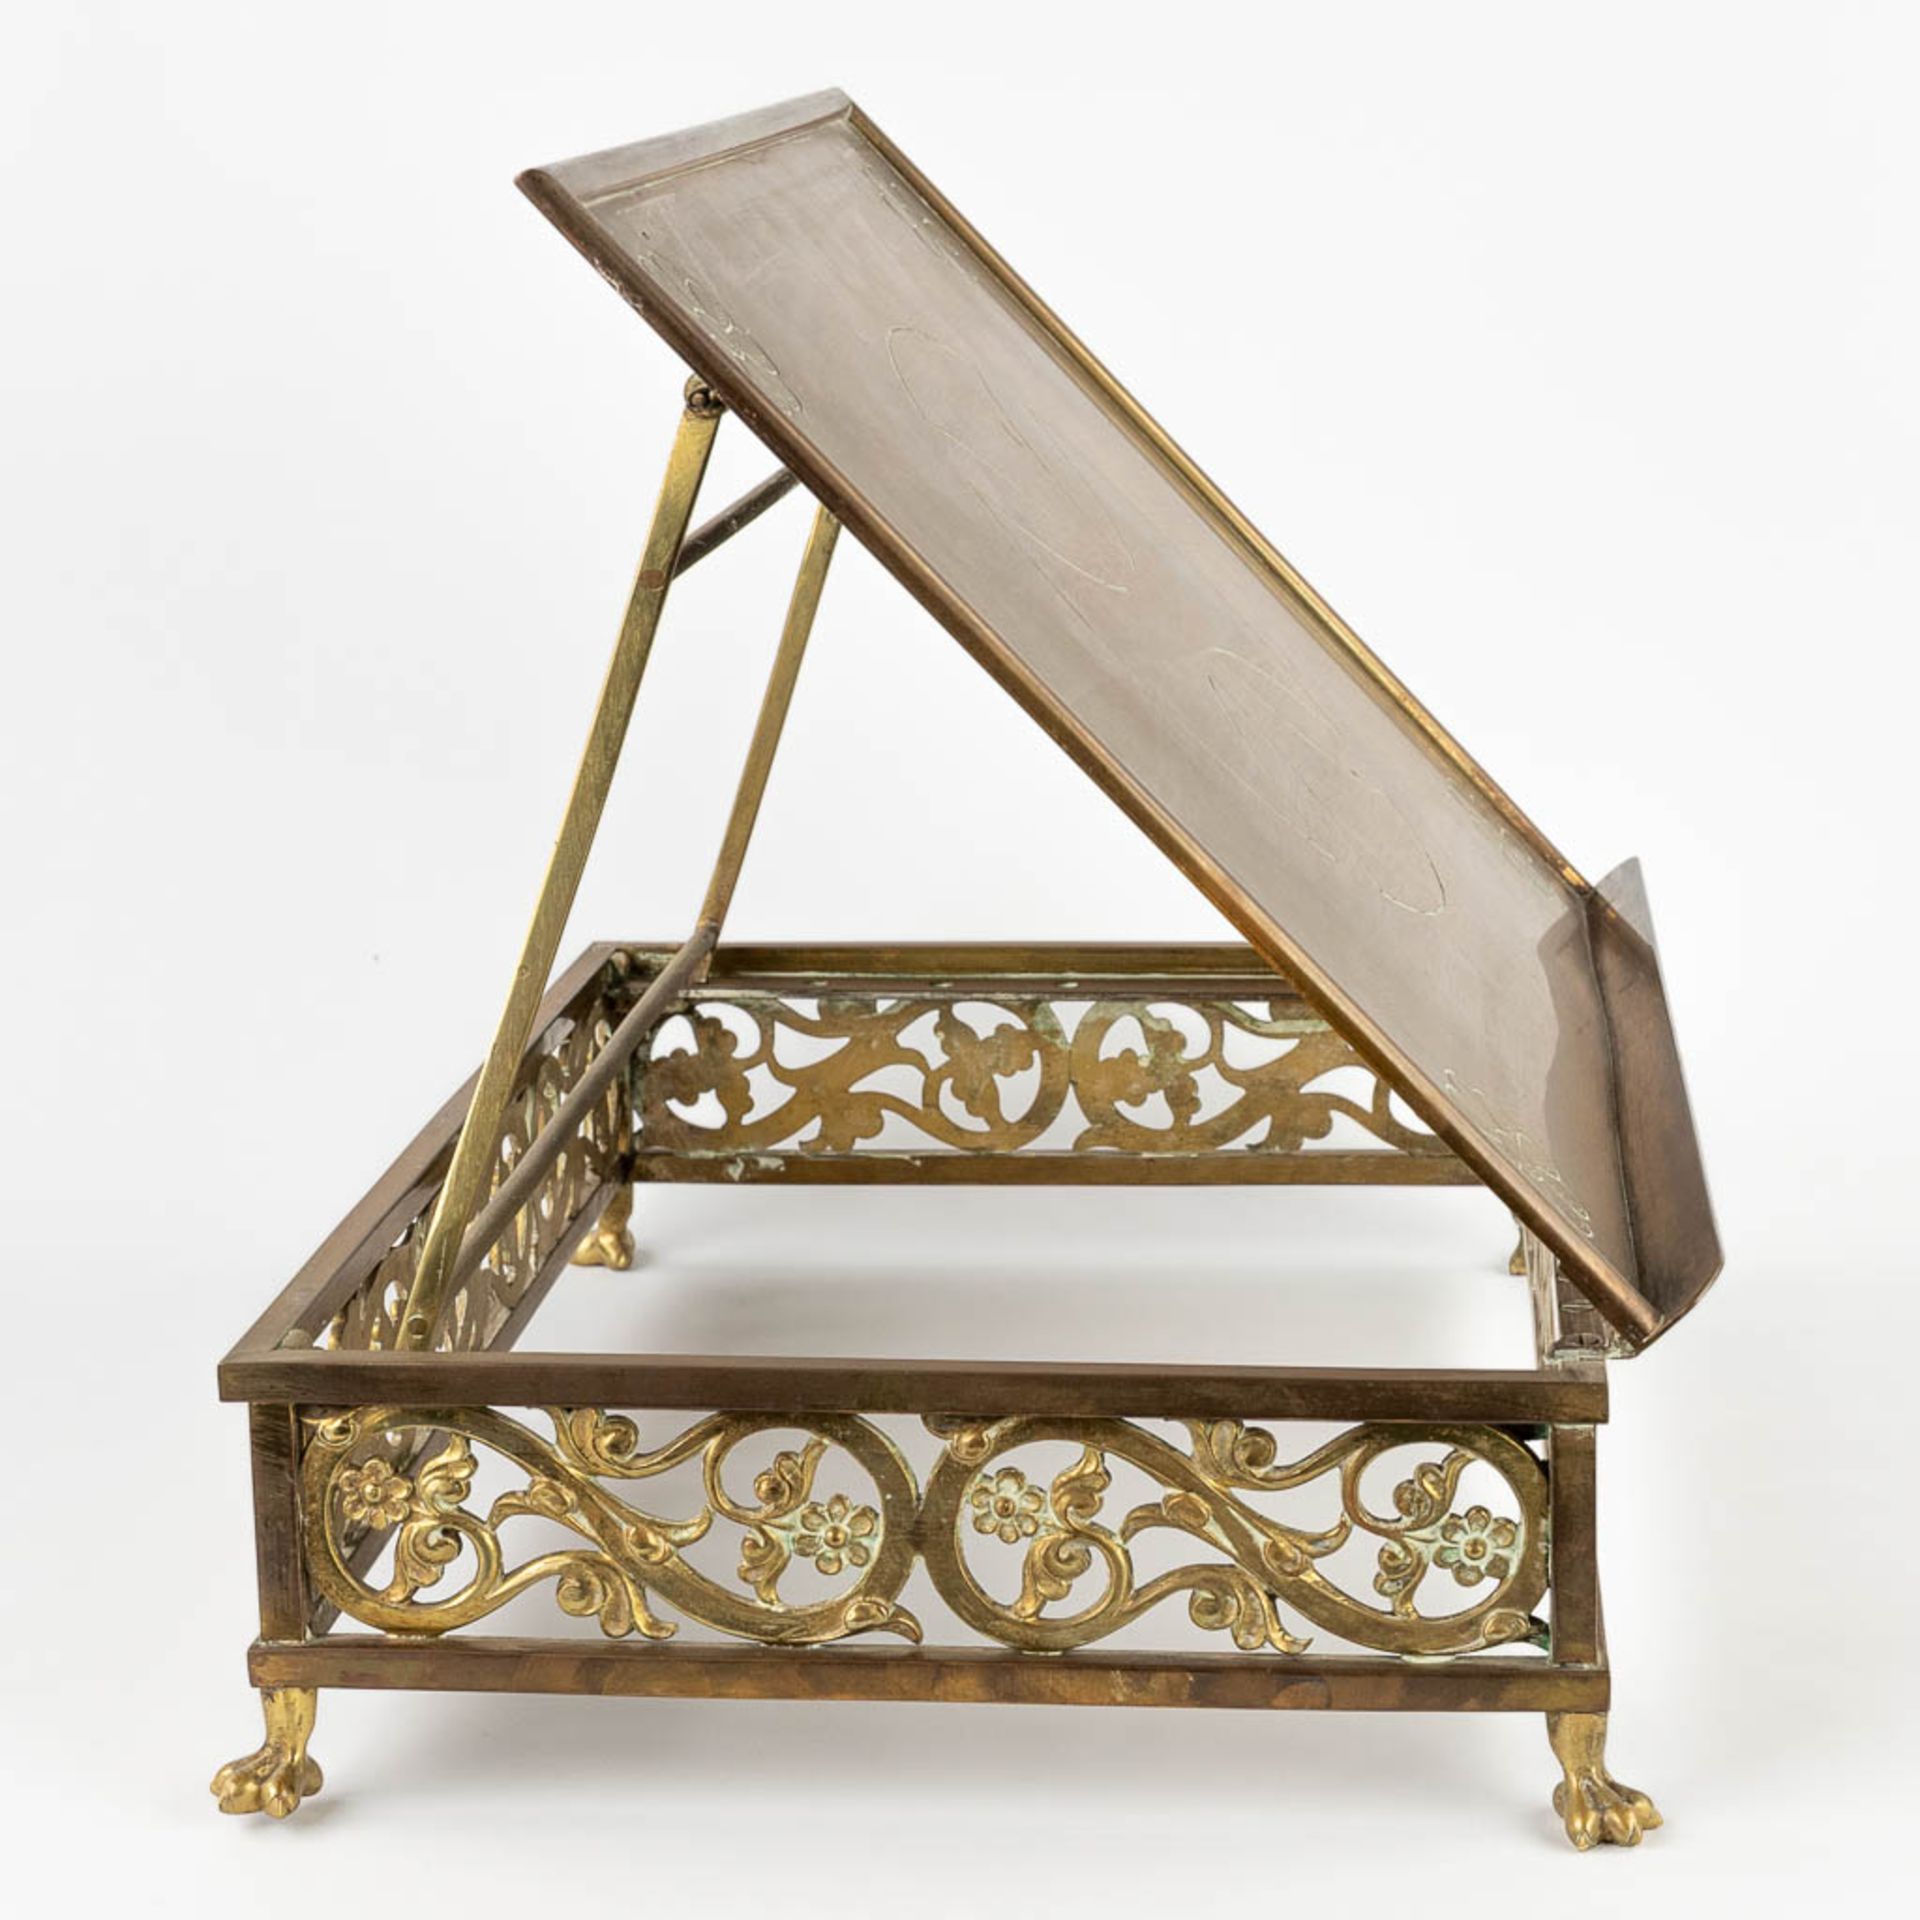 A lectern, bronze in a Gothic Revival style. Circa 1900. (D:30 x W:44 x H:35 cm) - Image 6 of 10